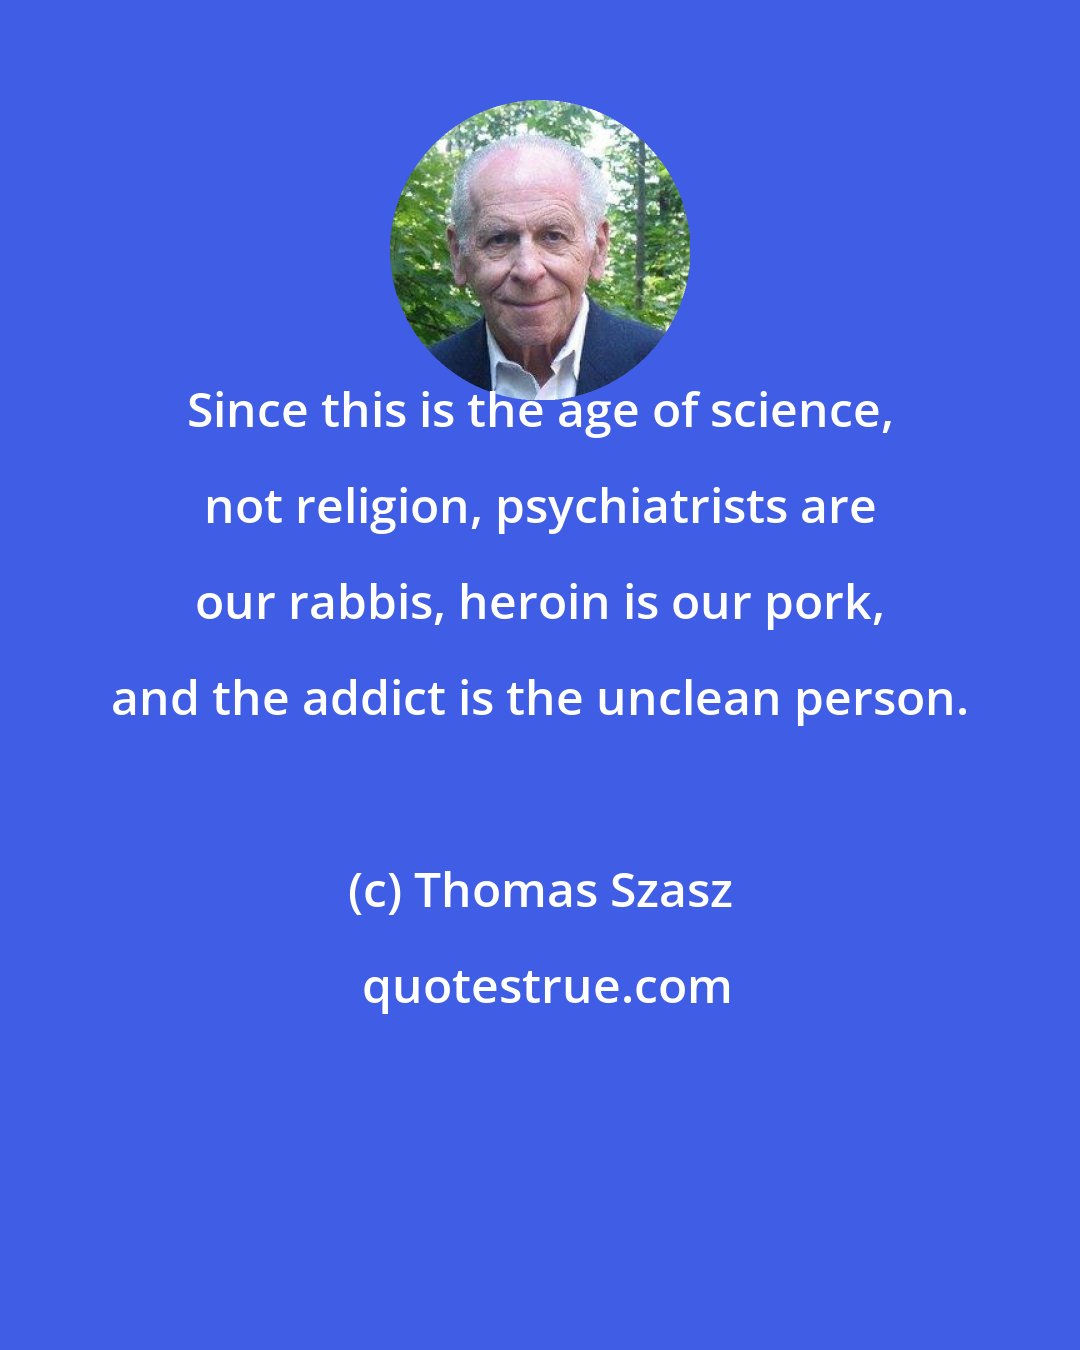 Thomas Szasz: Since this is the age of science, not religion, psychiatrists are our rabbis, heroin is our pork, and the addict is the unclean person.